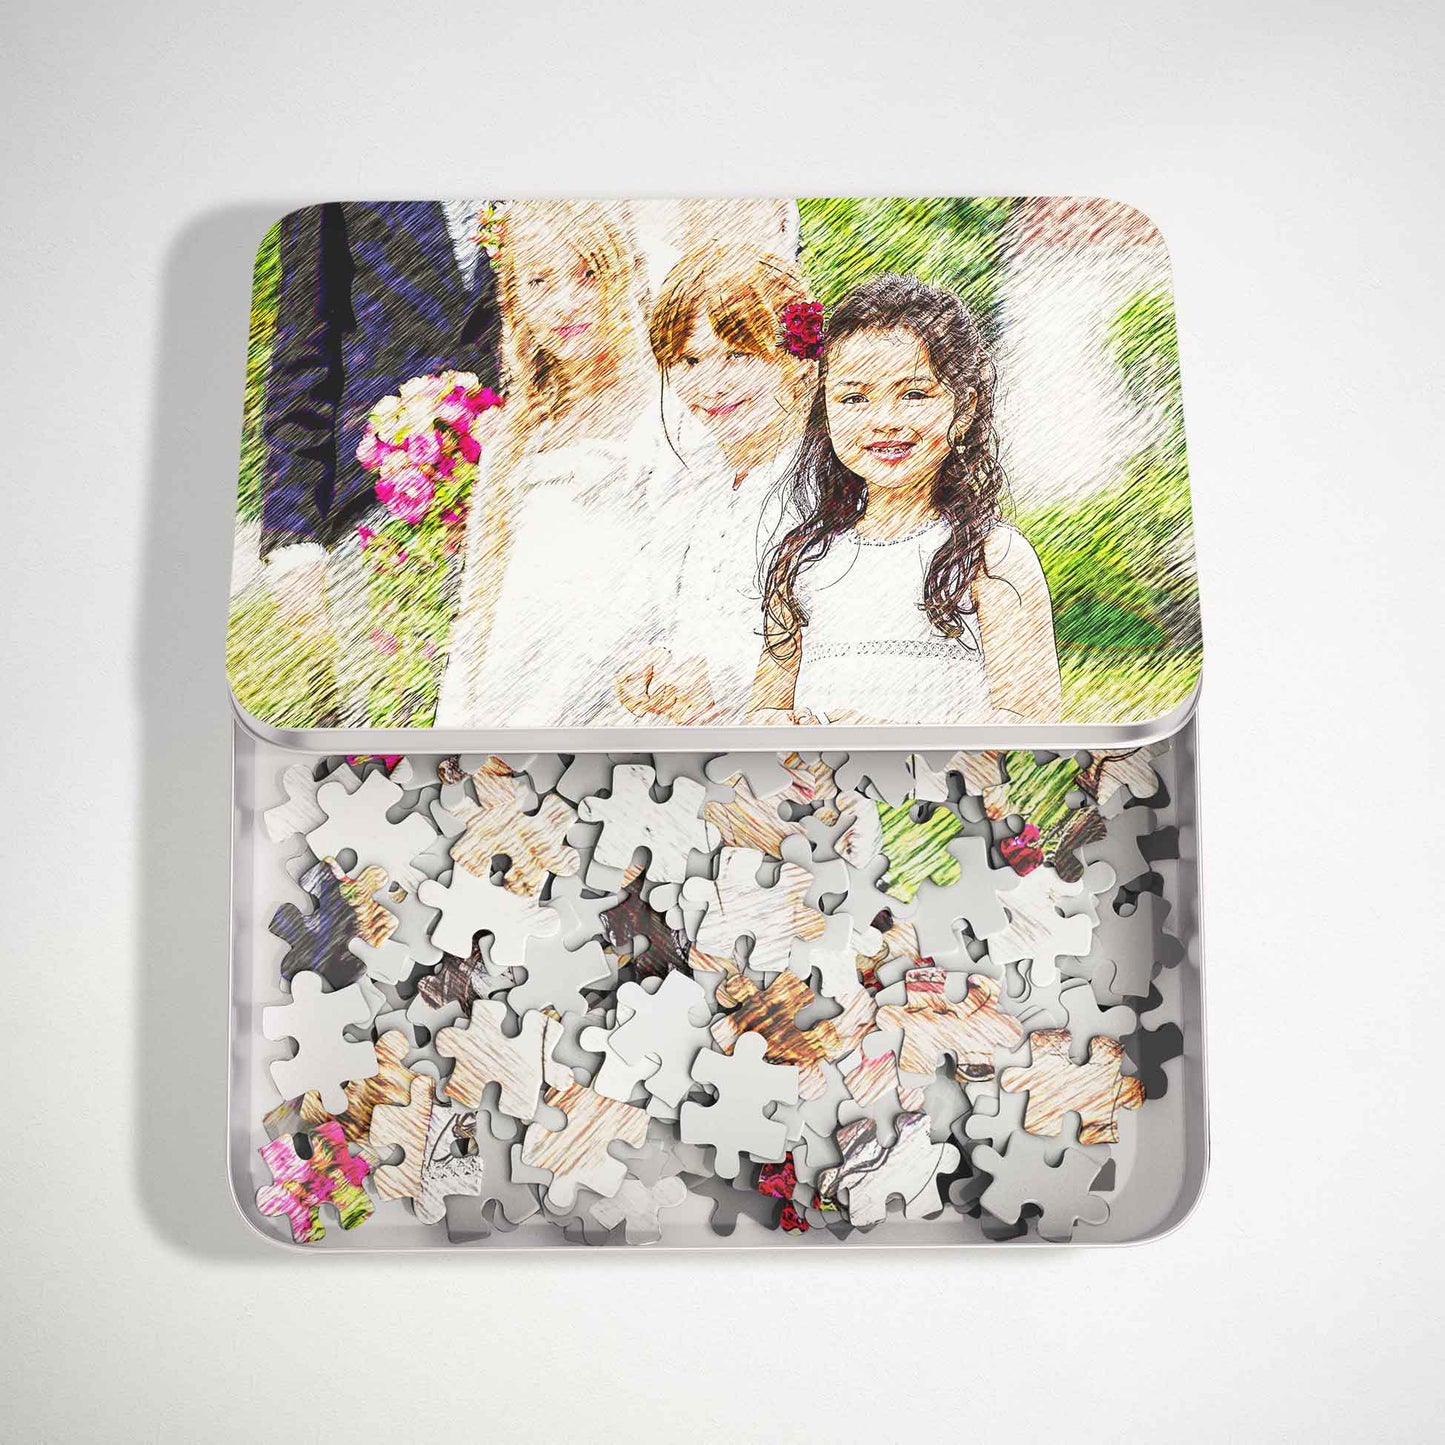 Unleash your creativity with our Personalised Artsy Illustration Jigsaw Puzzle, featuring a custom design crafted from your cherished photo. Each piece is a work of digital art, ensuring a unique and original puzzle experience